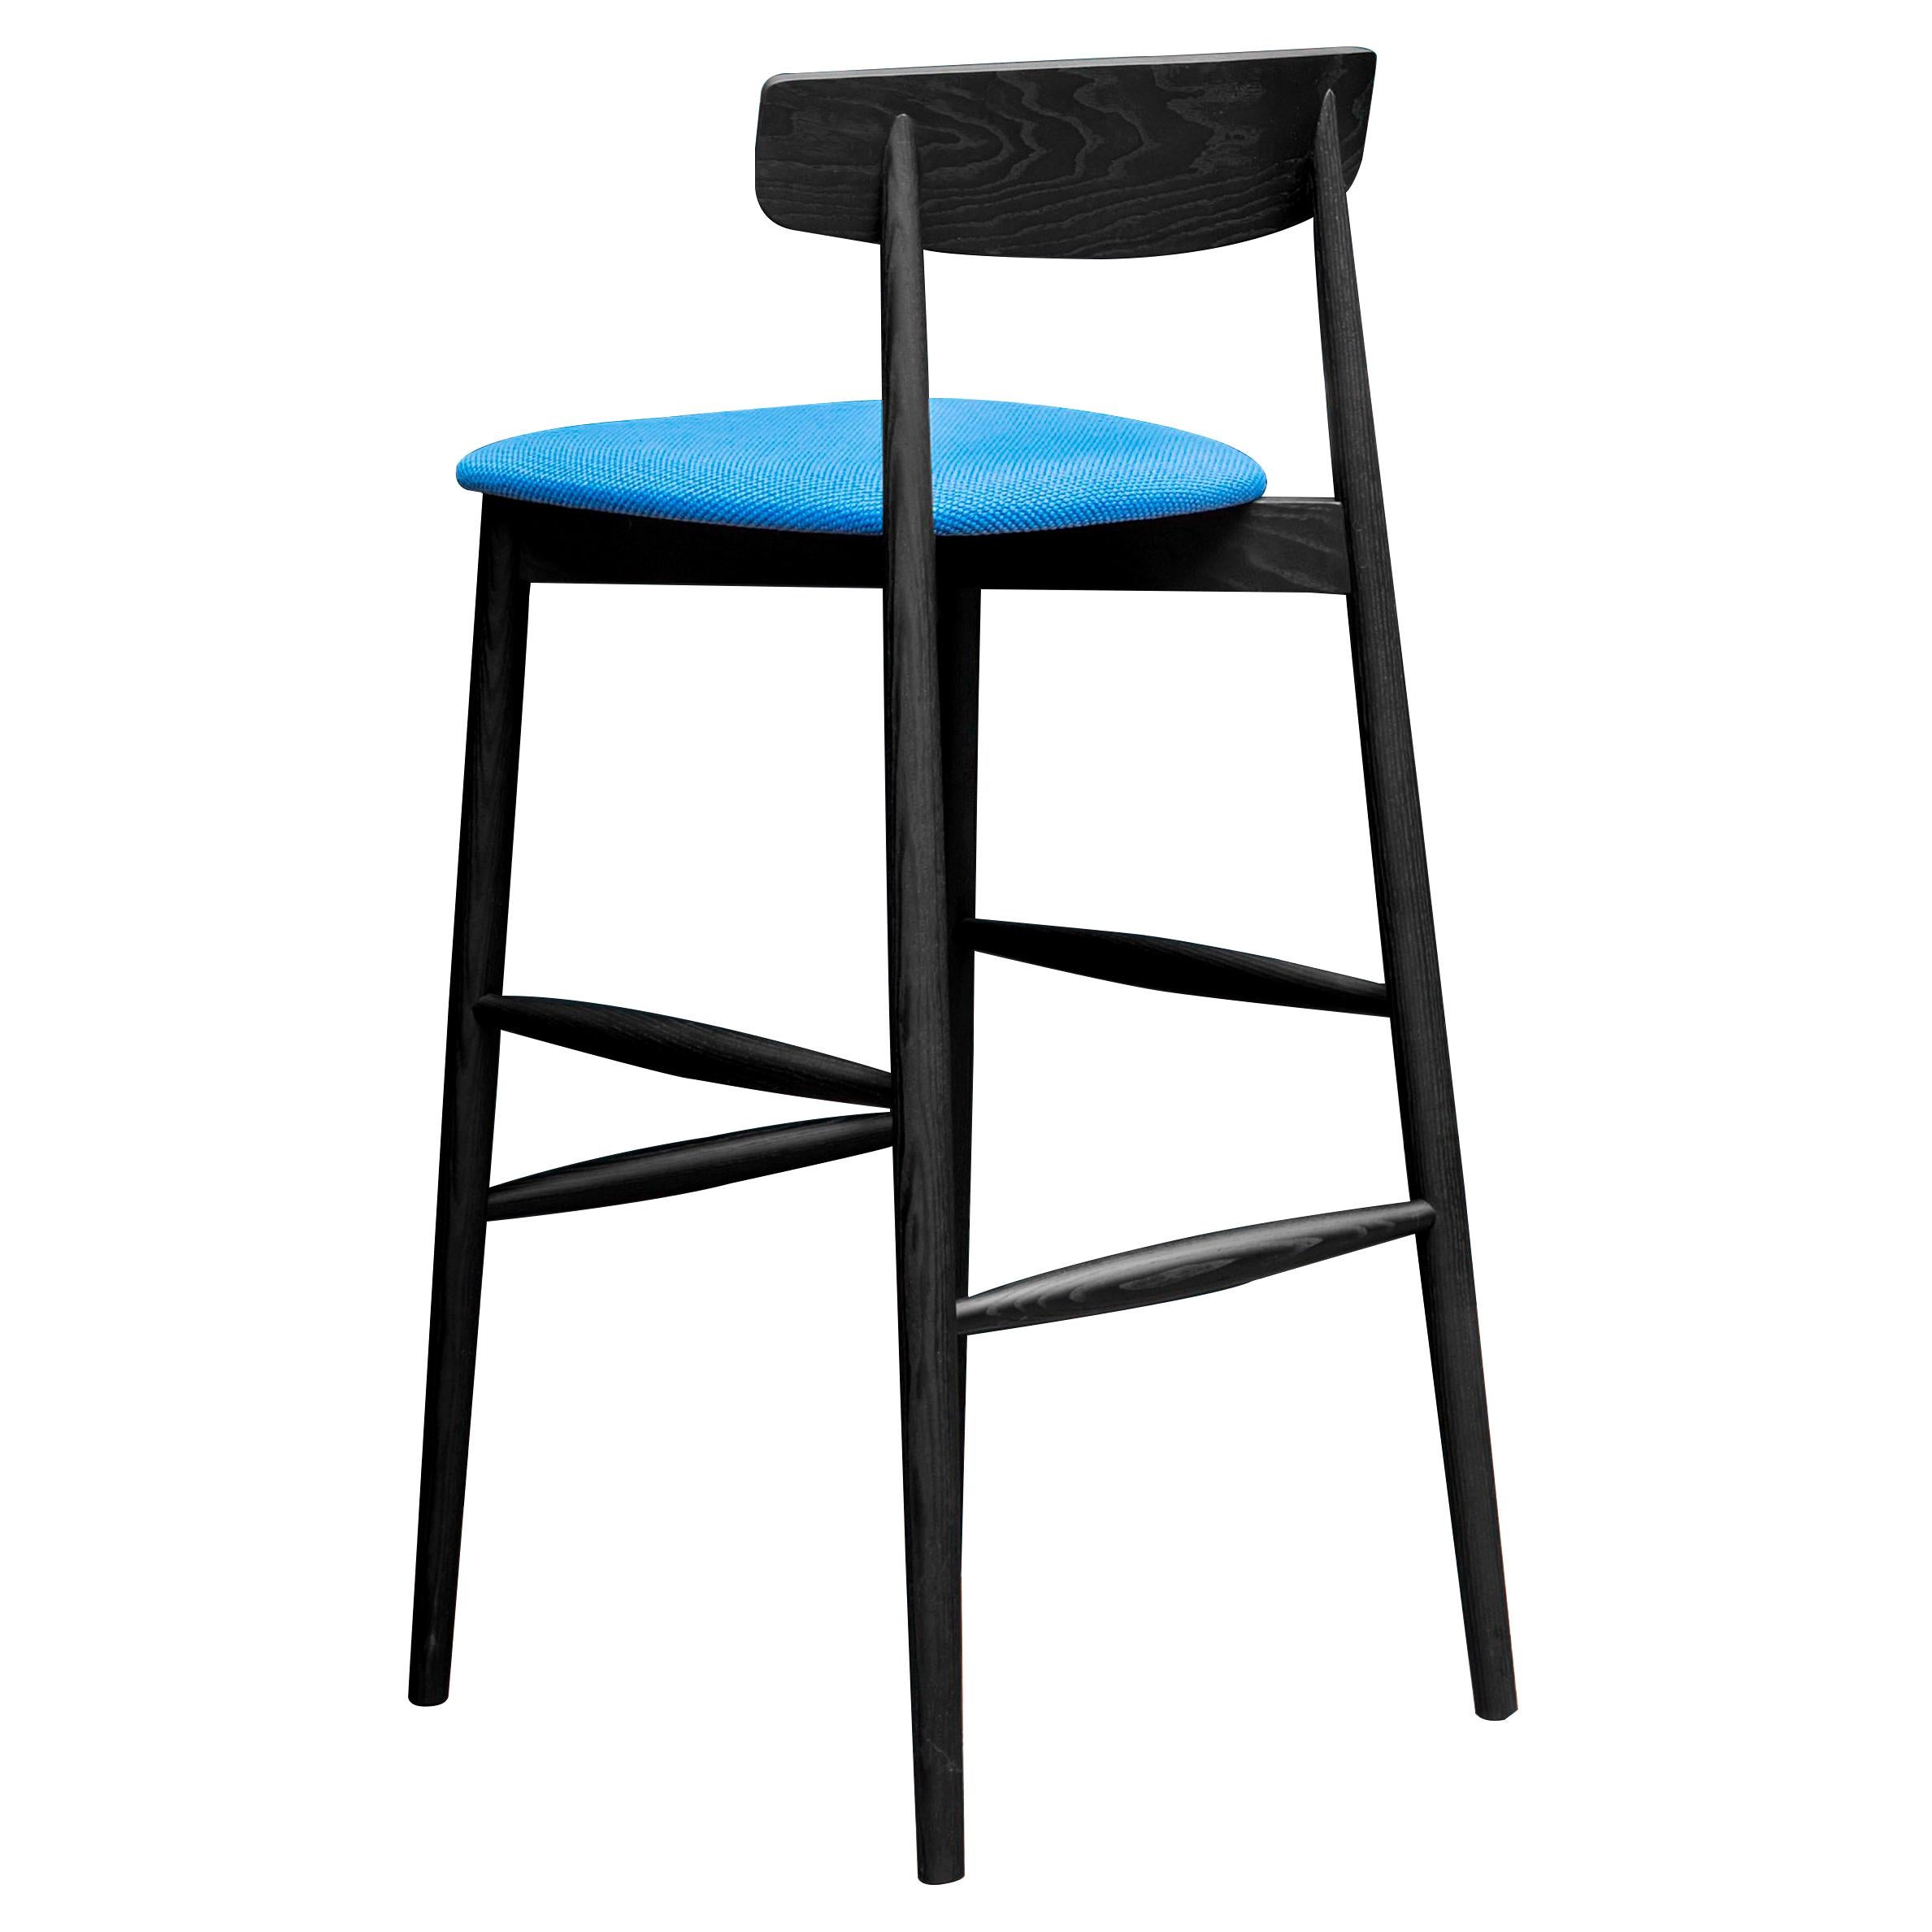 Claretta Large Stool in Tanimo Ultramarine Blue Upholstery with Black Ash Frame For Sale